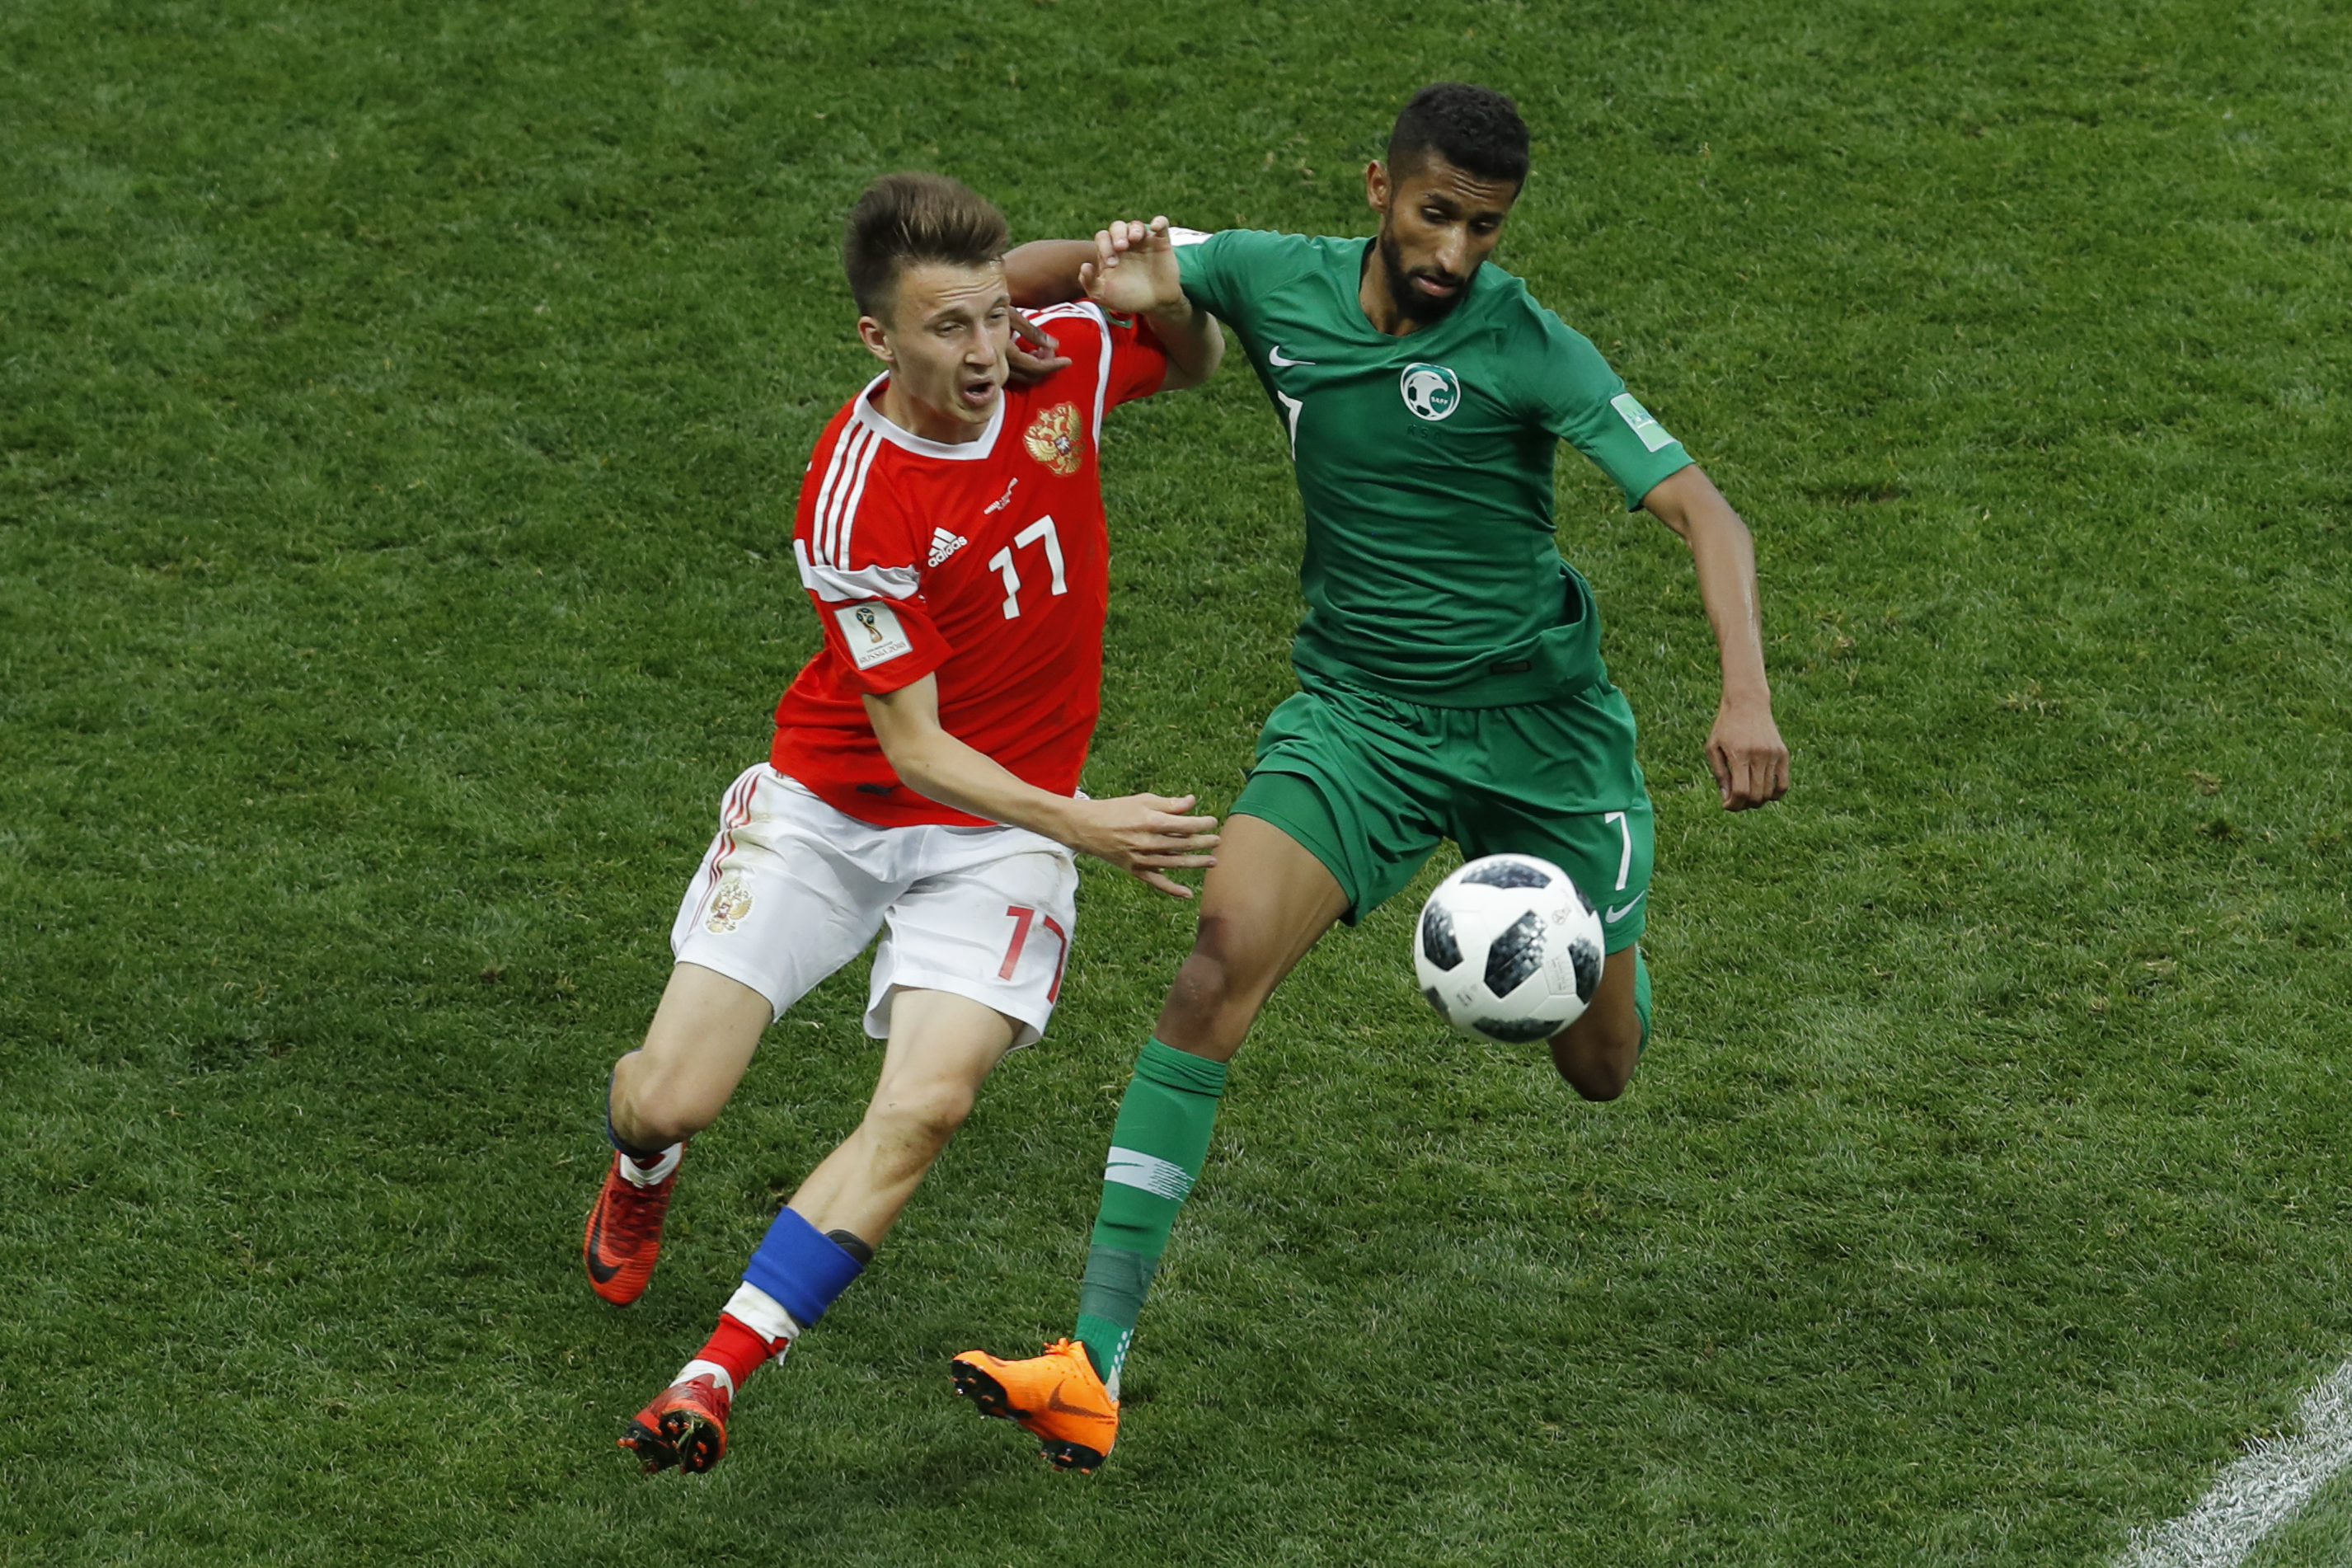 Russia and Saudi Arabia contest the first game of the 2018 World Cup